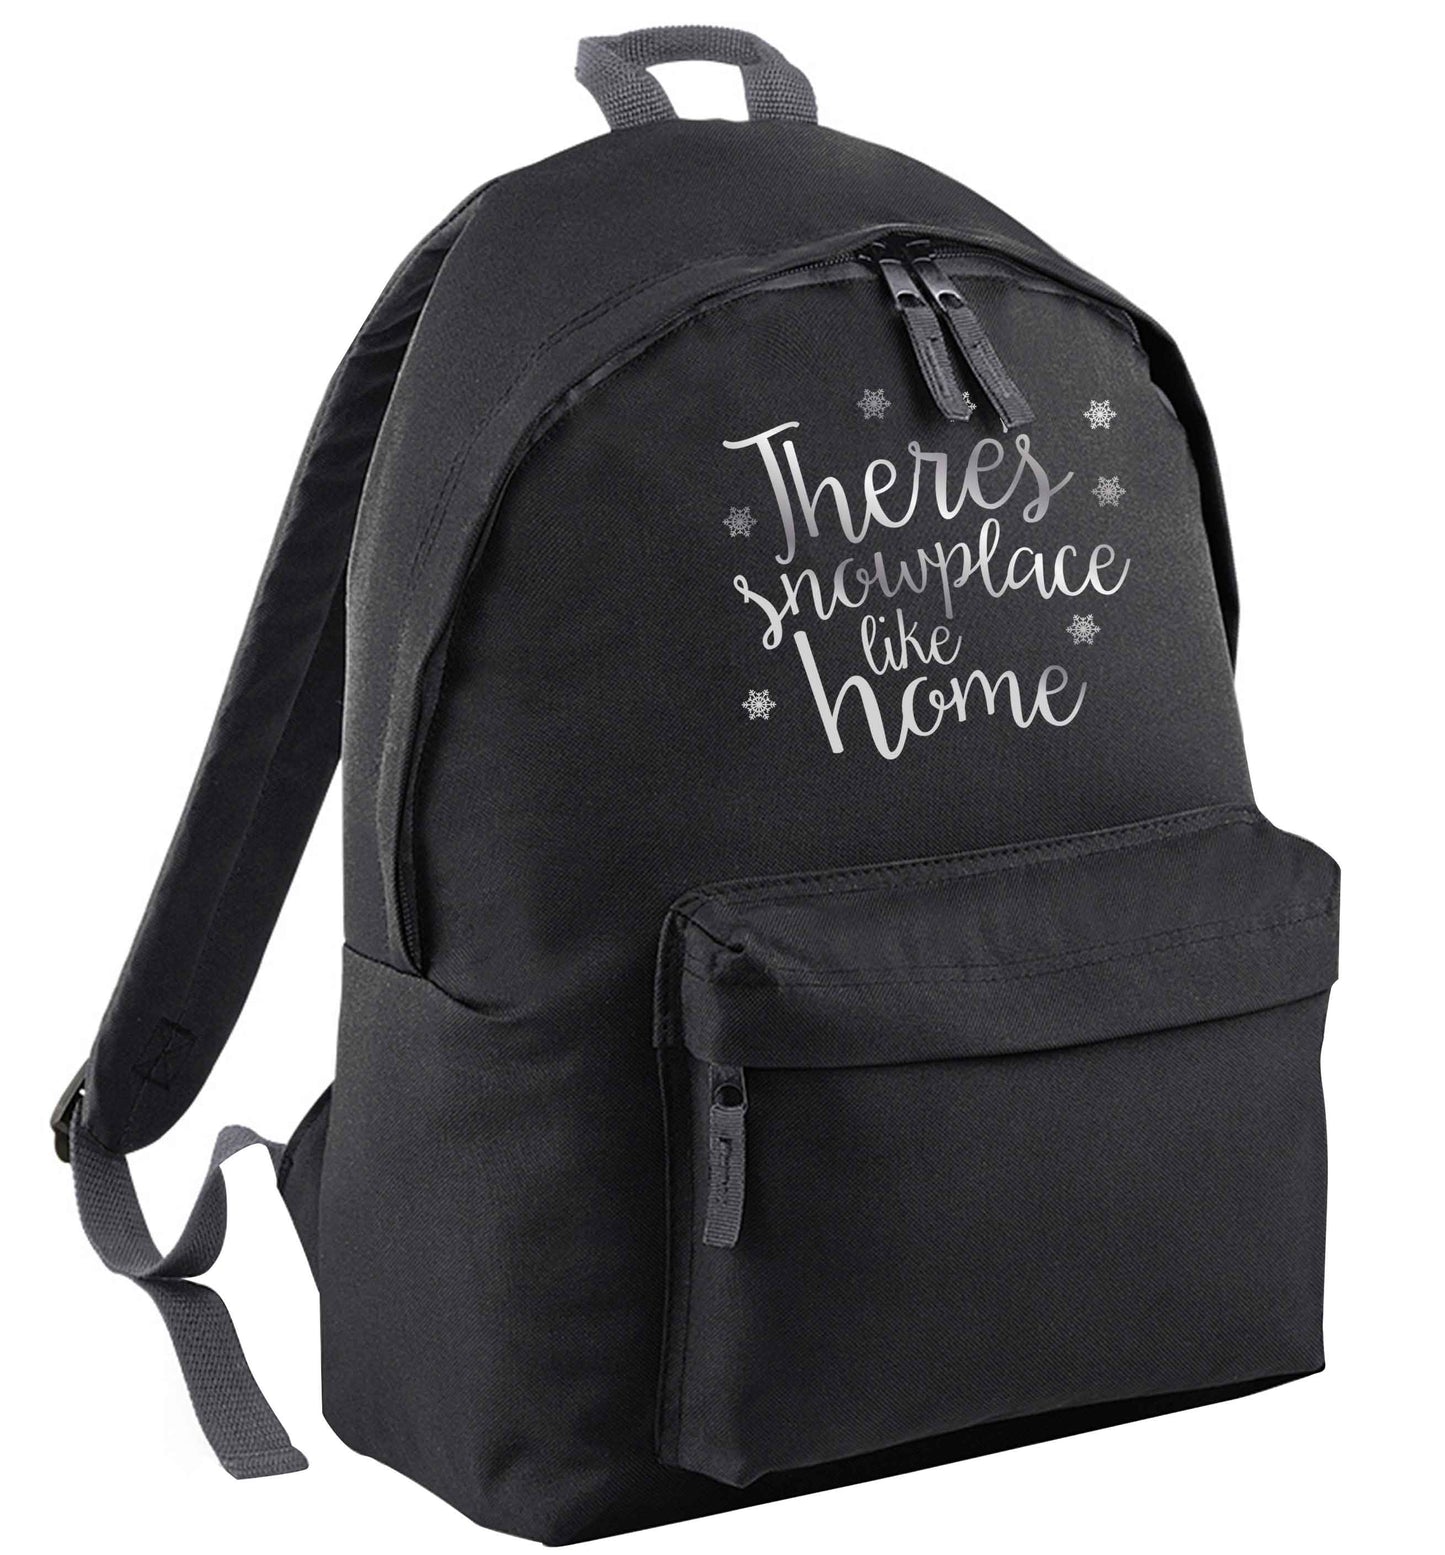 There's snowplace like home - metallic silver | Adults backpack